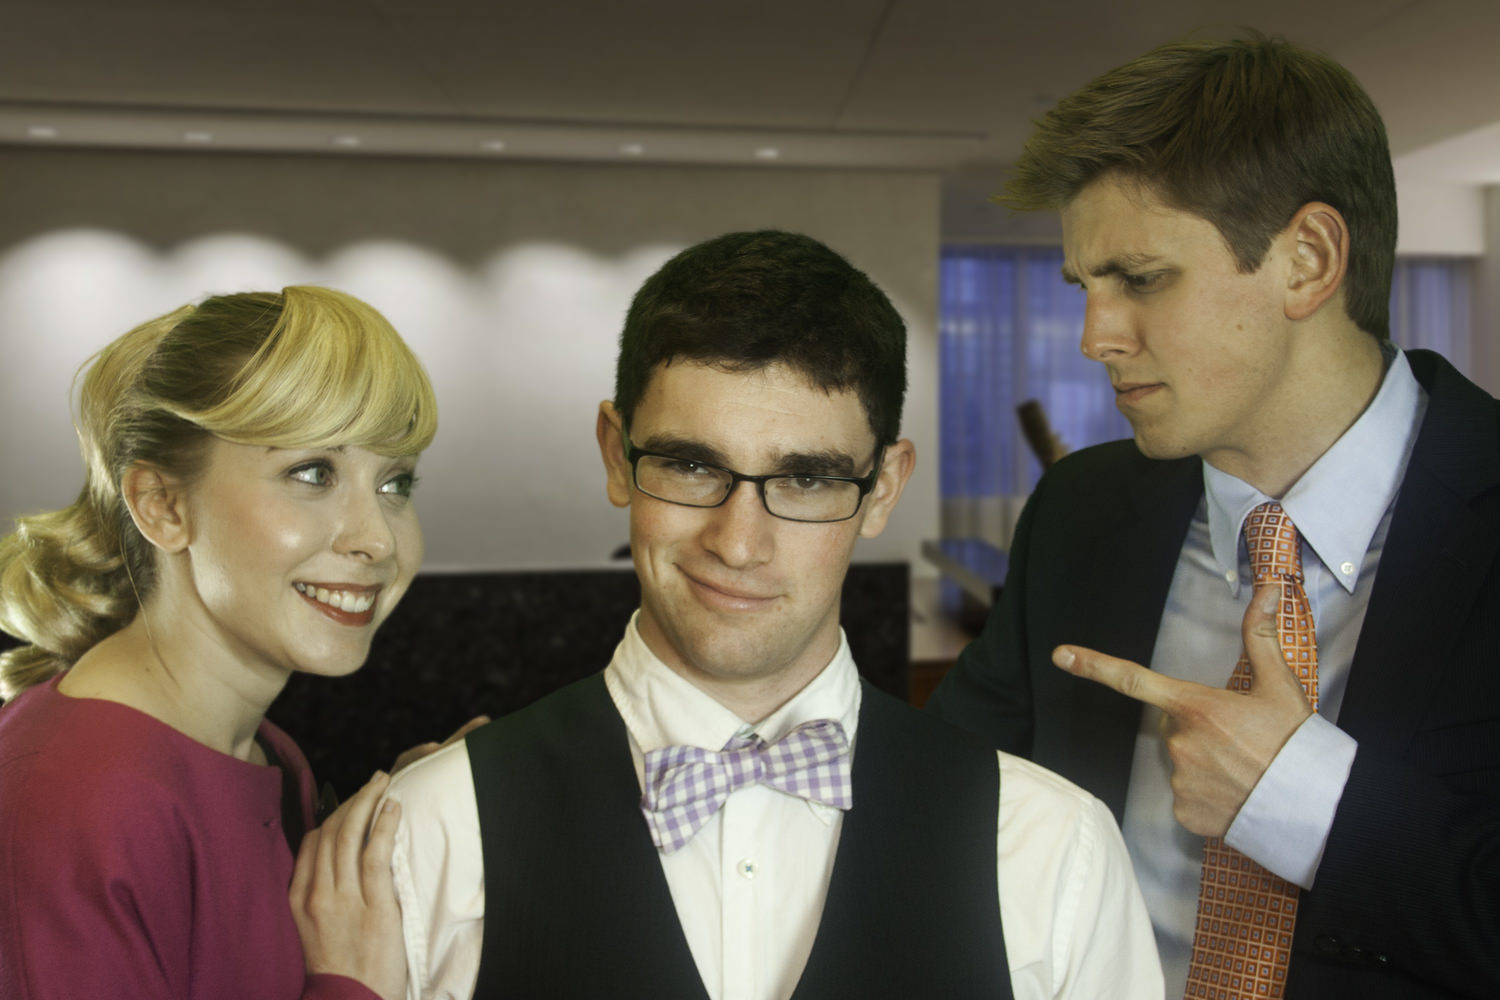 Left to right, Rosemary Pilkington (Lindsay Schulz), J. Pierrepont Finch (Gary Craig Schoenfeld), and Bud Frump (Mike Meadors) ( Photo: Michael Lodick )